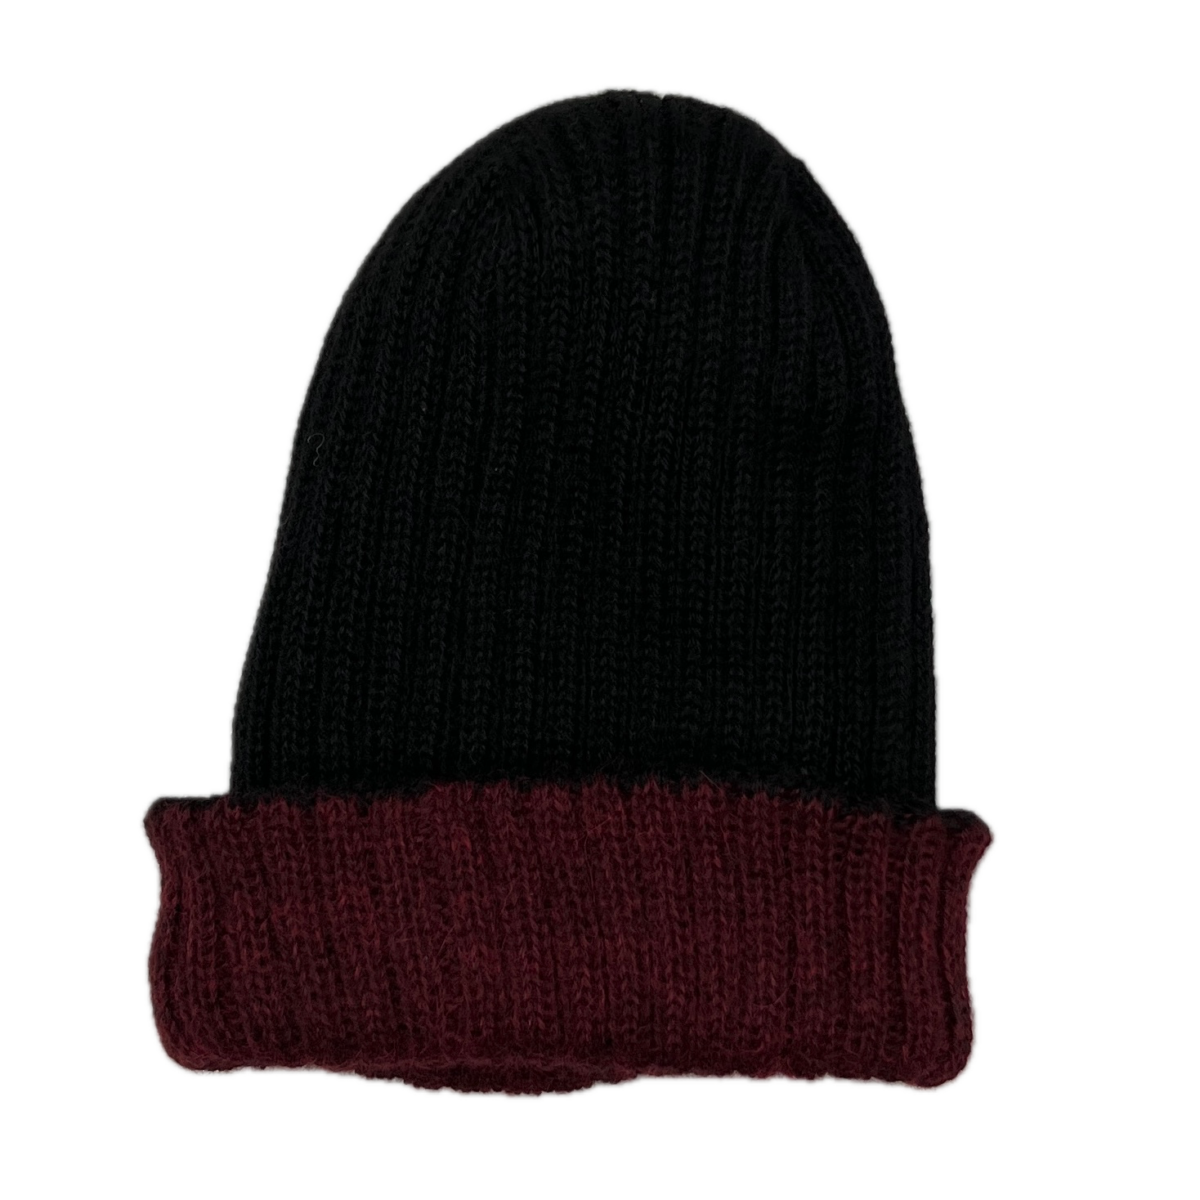 Alpaca Wool Hat in Black and Red